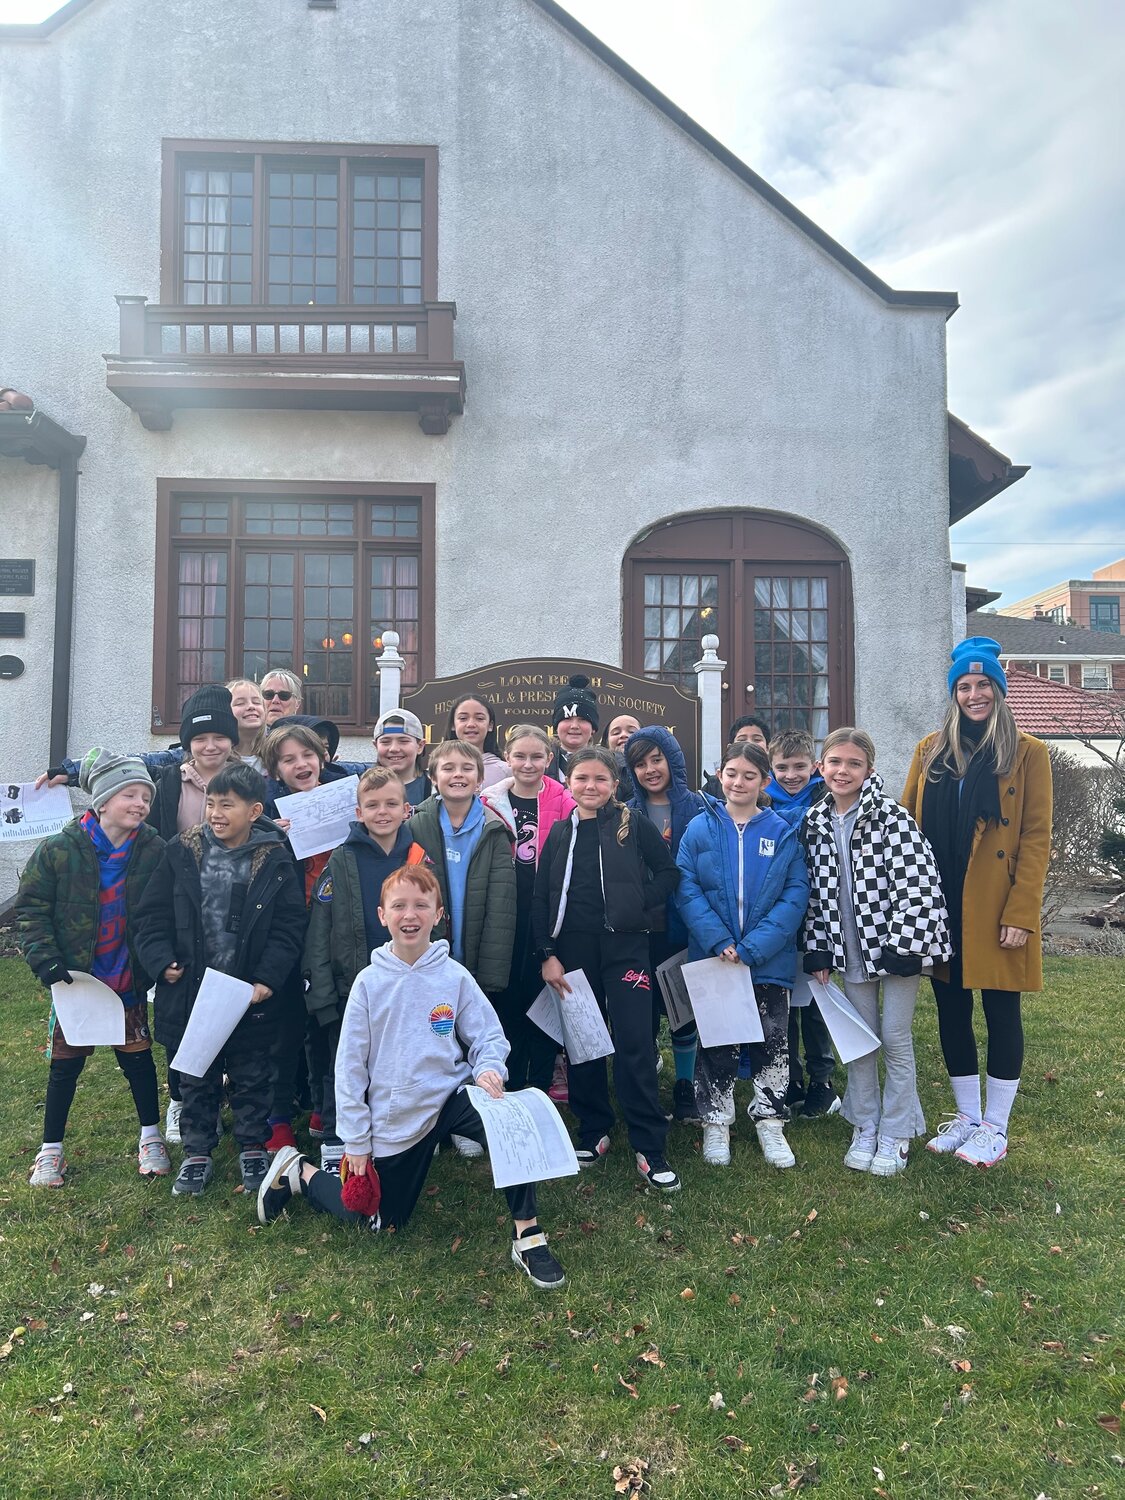 A number of classes took a trip to the Long Beach Historical Society, happily learning about what their hometown was like long ago.